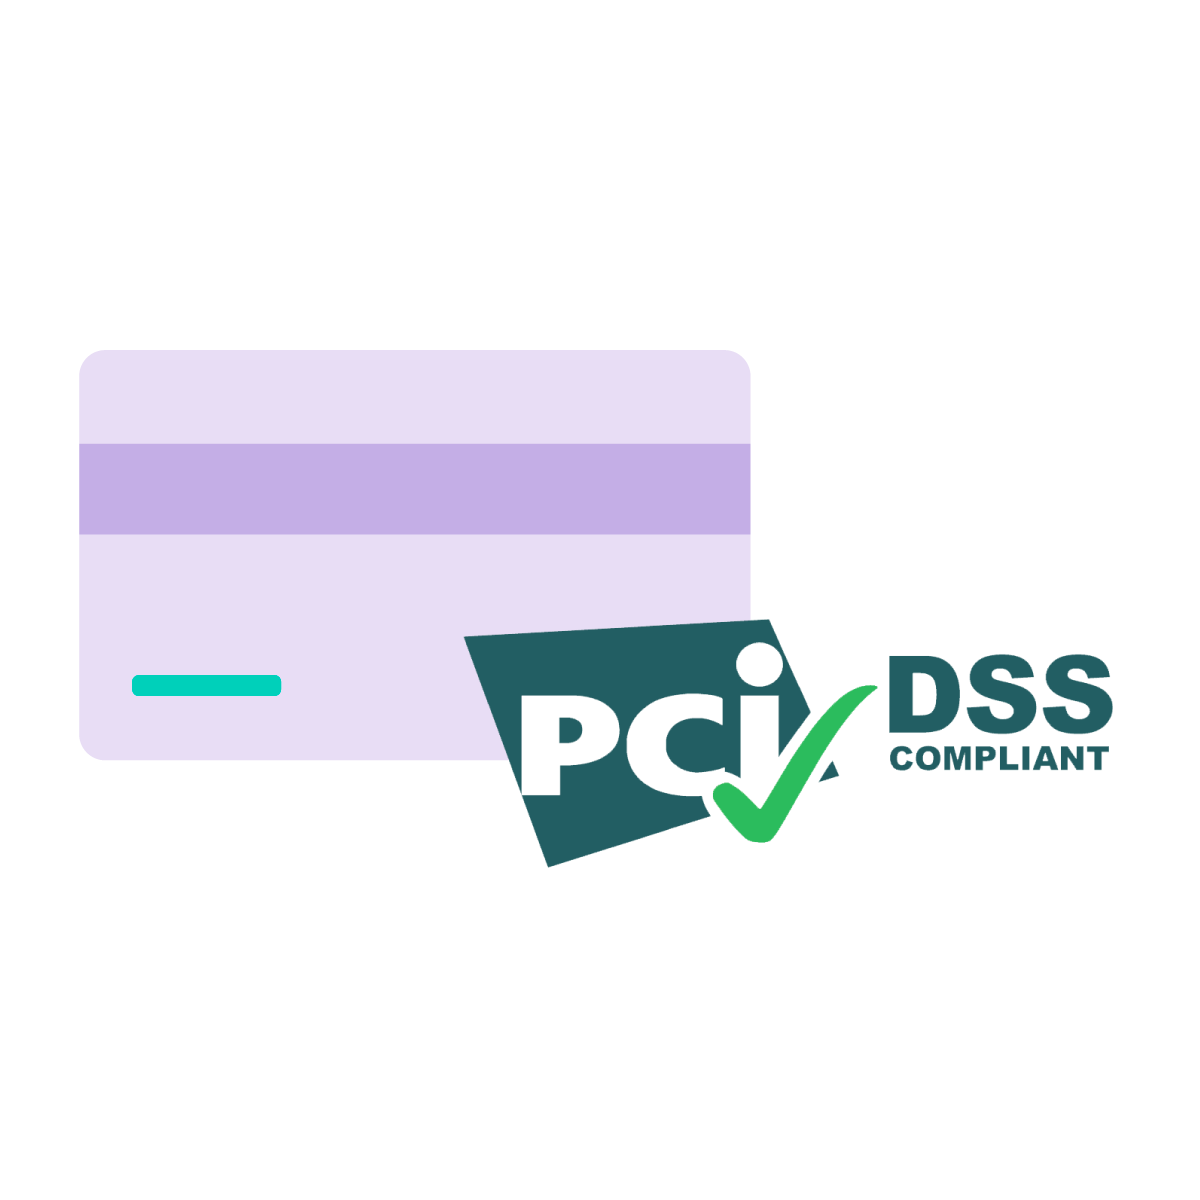 Icon of credit card and PCI-DSS Compliant logo